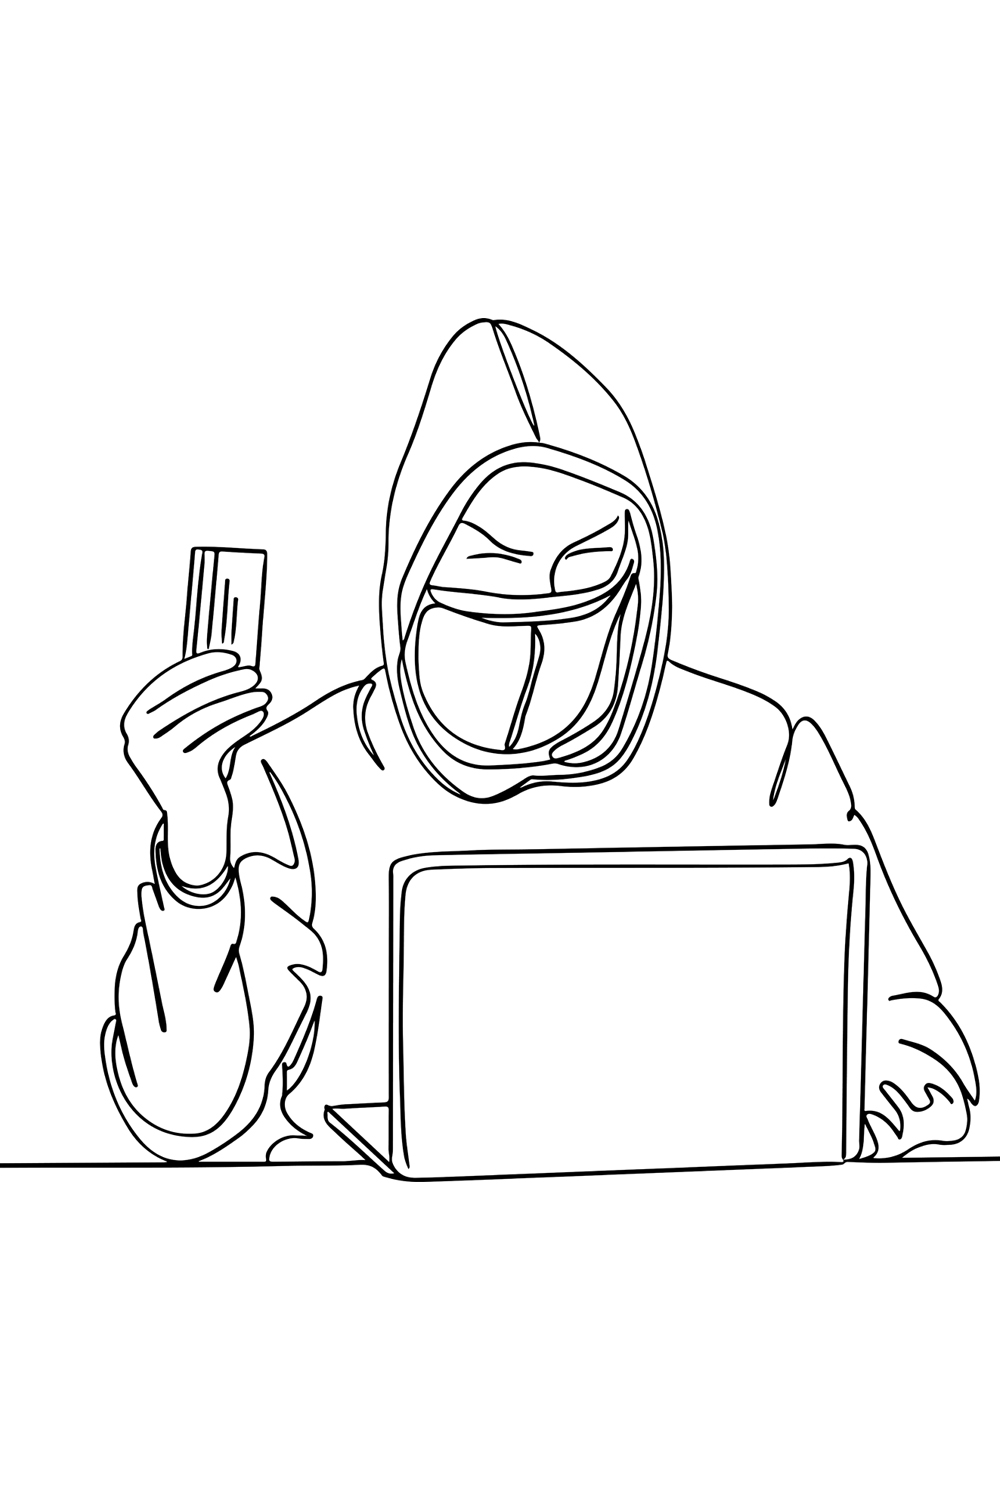 Phone Fraud Alert: Cartoon Illustration of Online Hacker with Credit Card, Hacking Chronicles: One-Line Drawing of Cyber Criminal in Mask pinterest preview image.